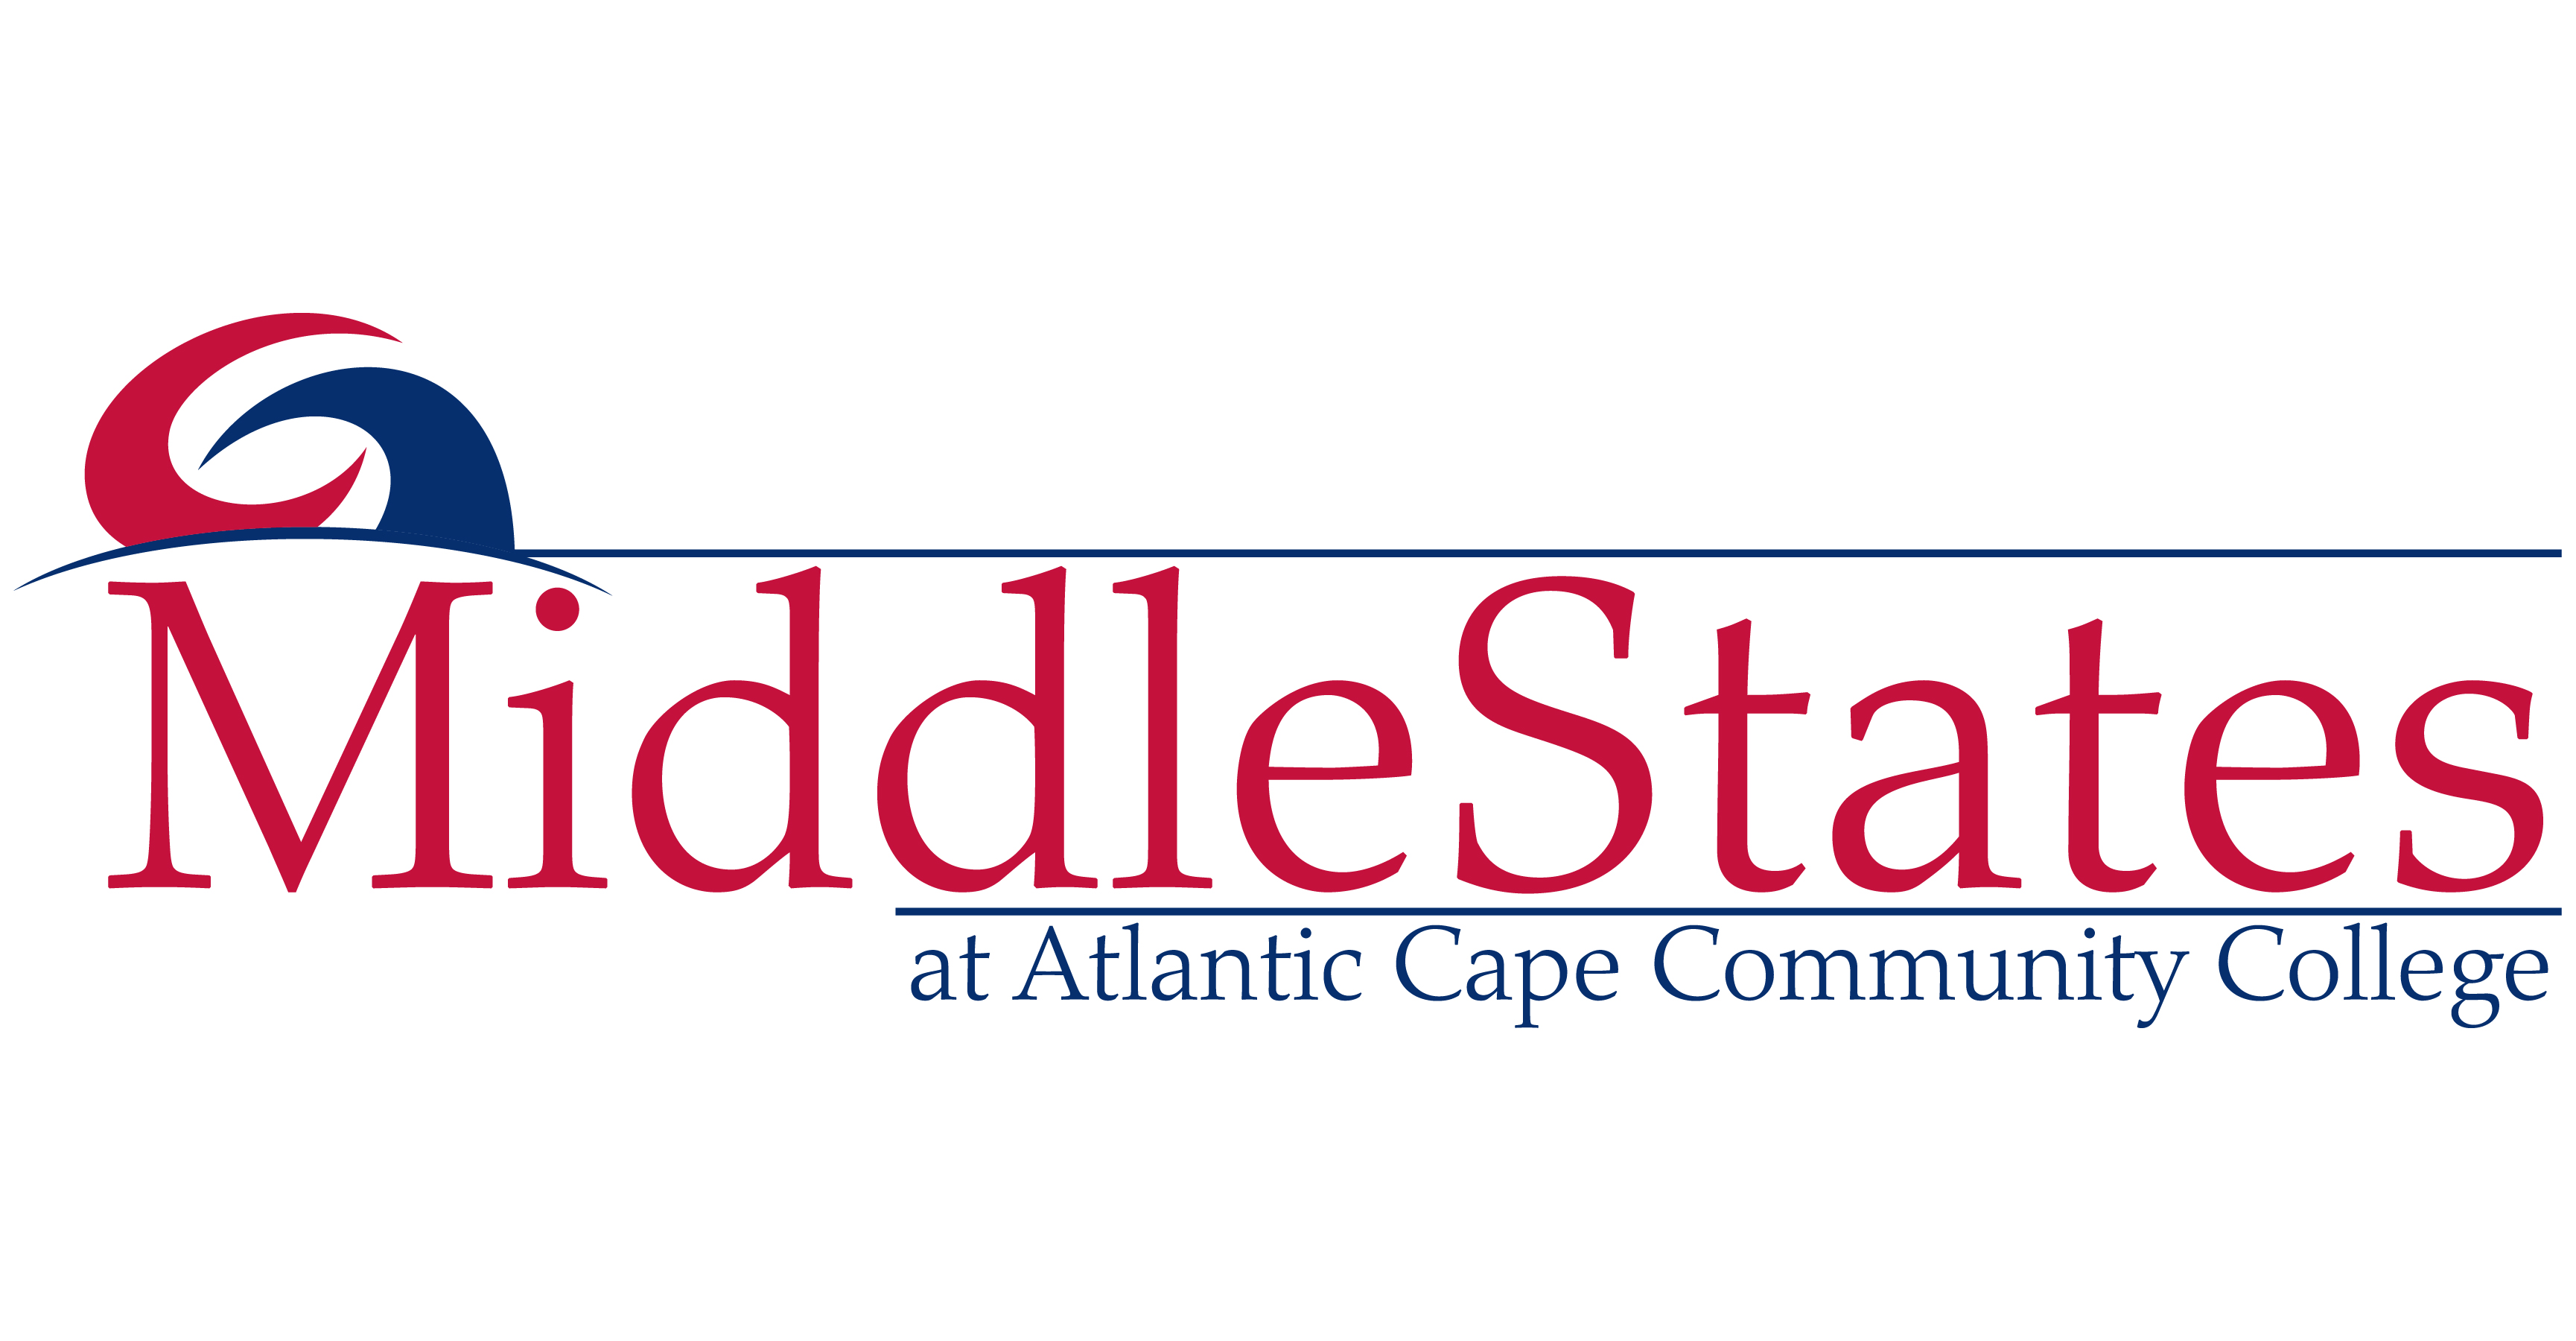 Middle States at Atlantic Cape